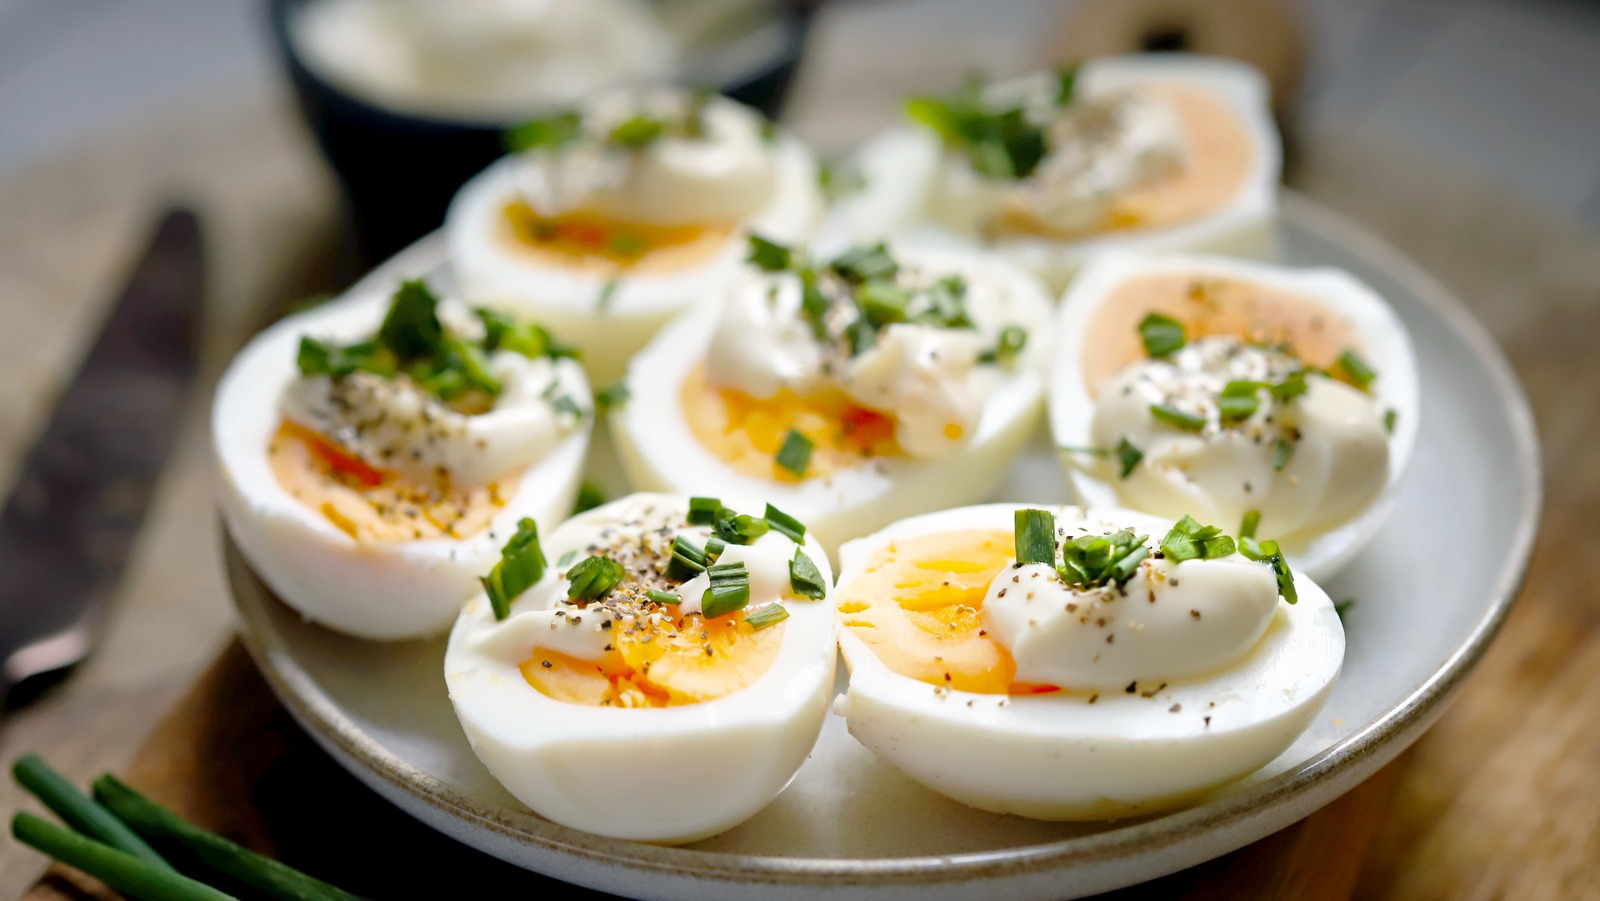 https://www.tastingtable.com/img/gallery/x-tips-to-make-cutting-hard-boiled-eggs-much-easier/l-intro-1698691913.jpg